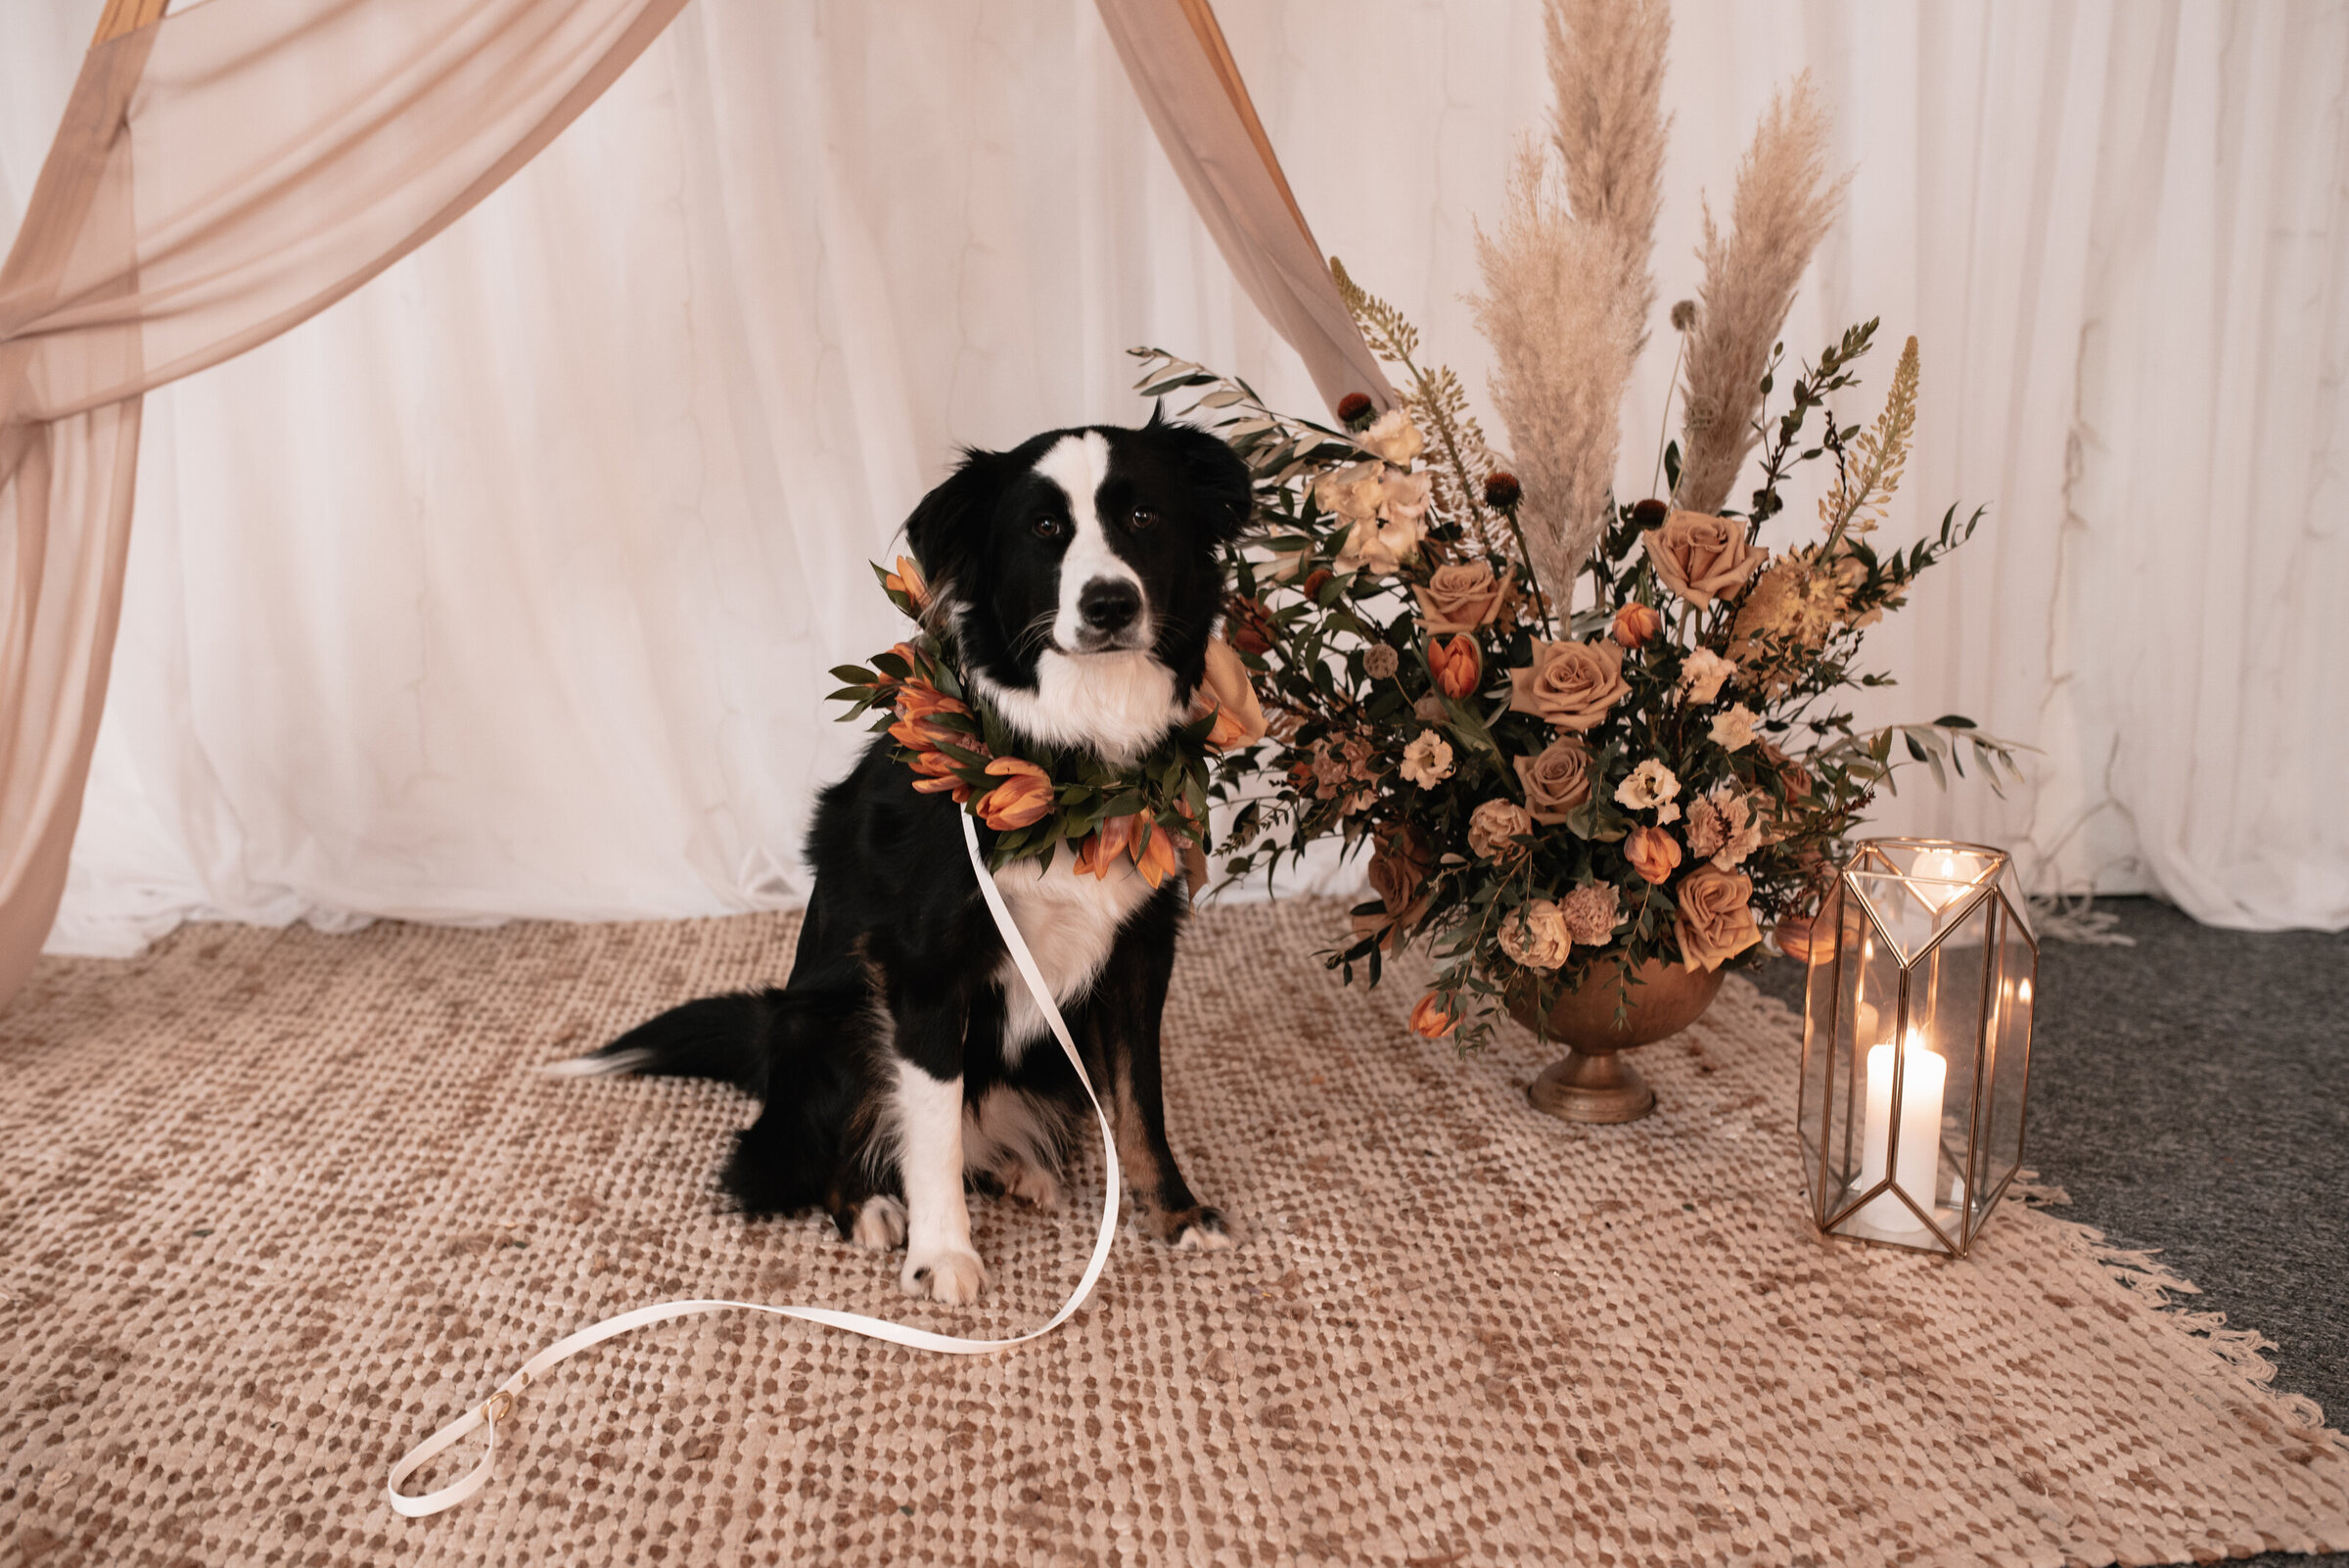 Collie puppy with floral collar sitting in front of ceremony set up with floral arrangement and pillar candles